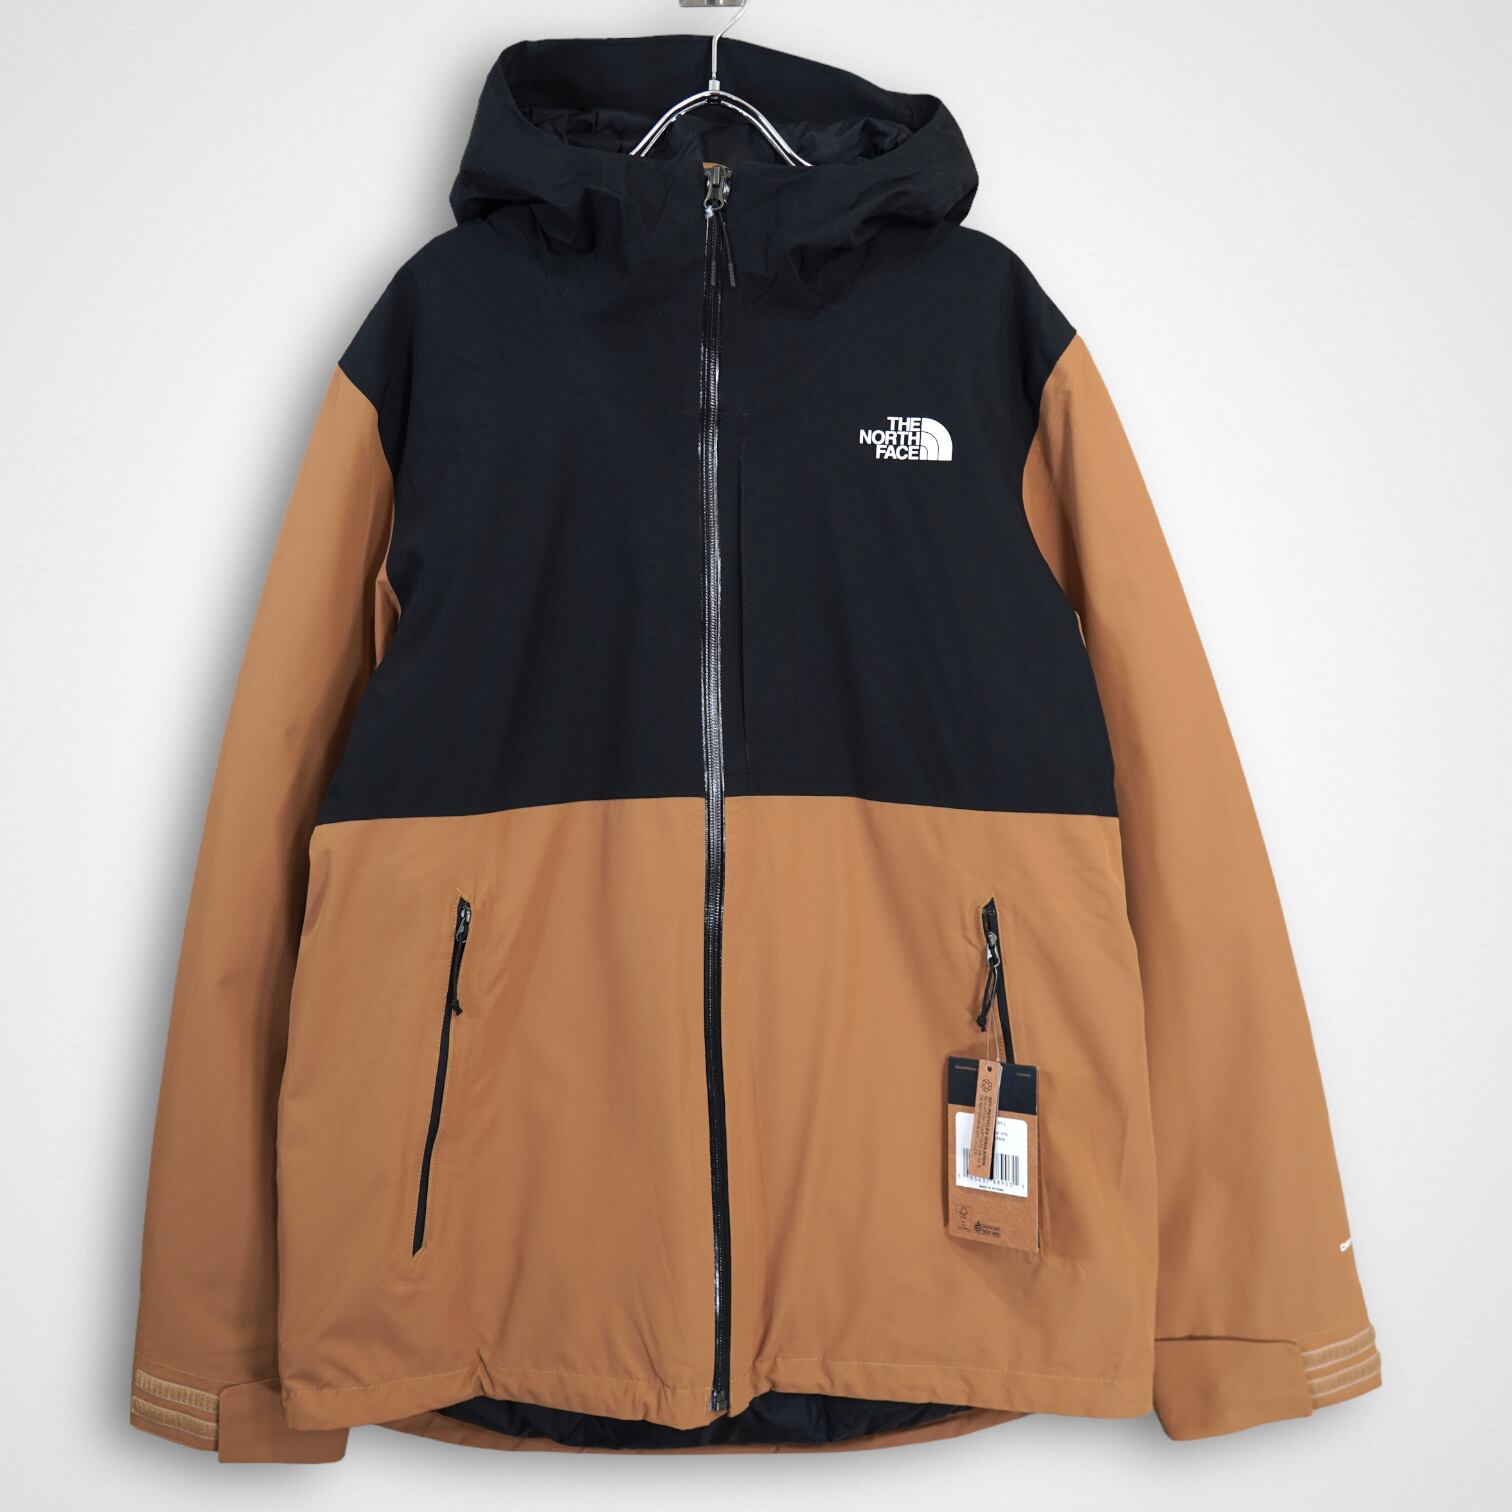 THE NORTH FACE｜Inlux insulated jacket｜US Limited｜DEAD STOCK